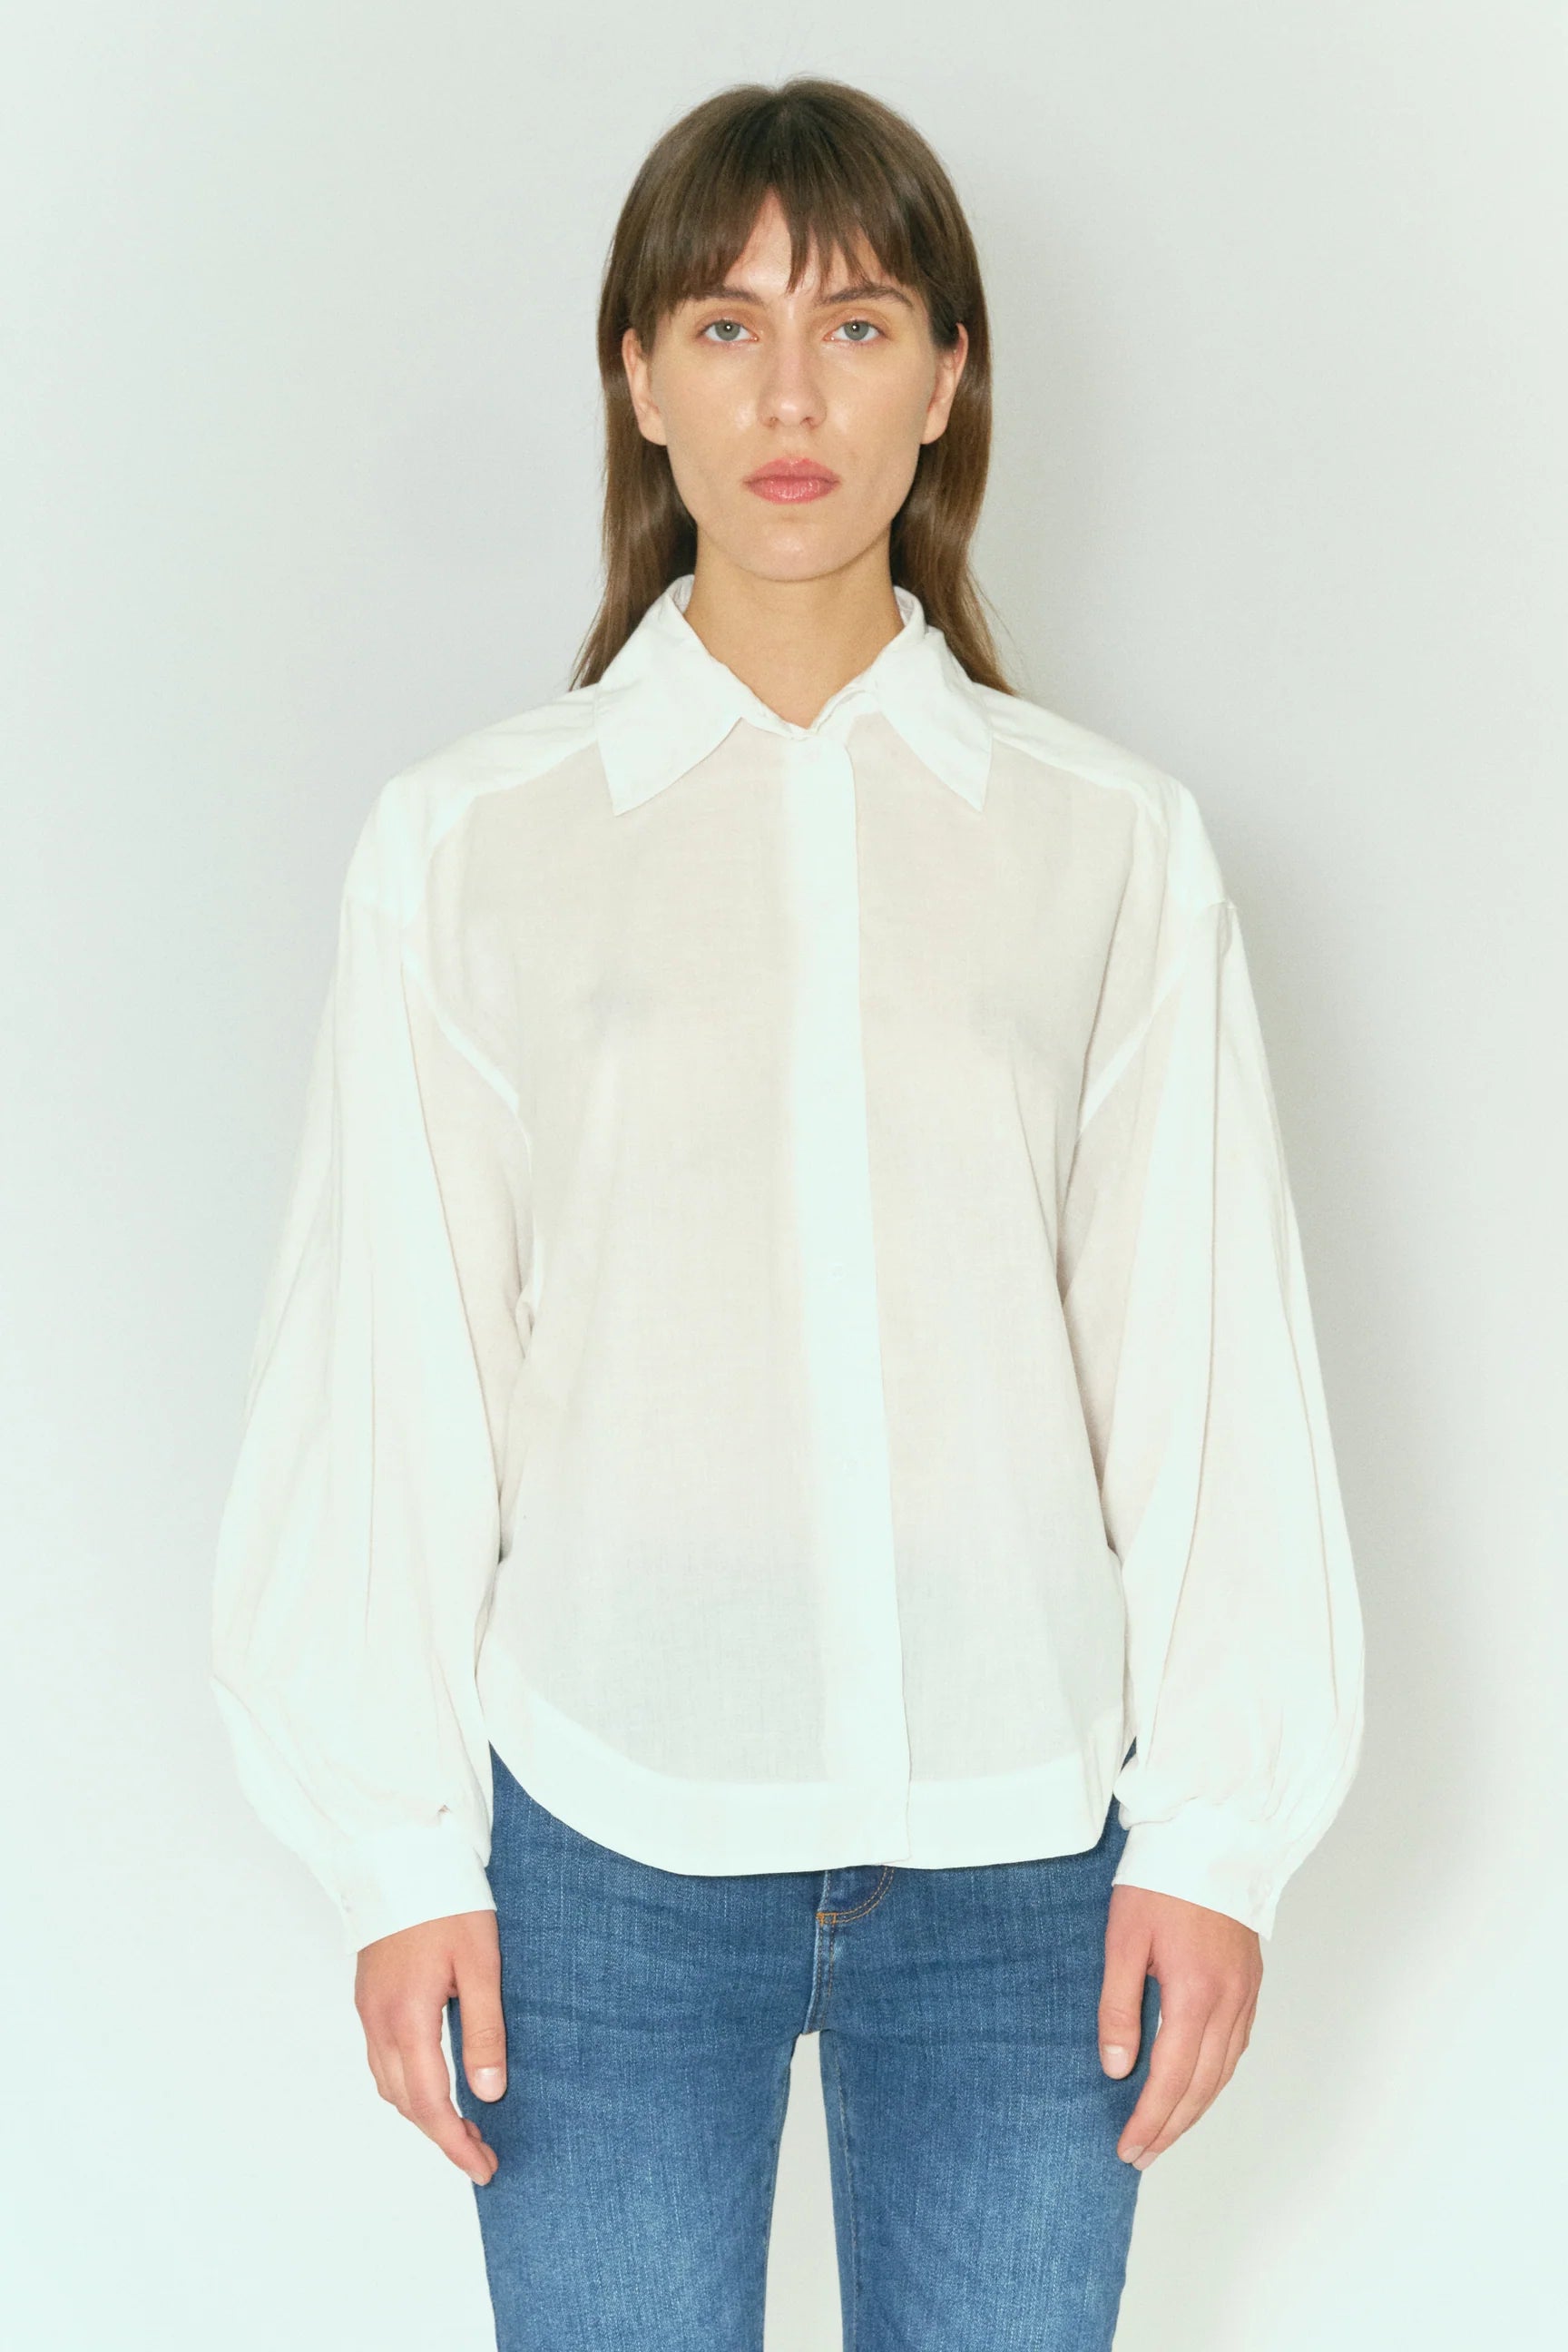 The model is wearing a Tomorrow Denim Sienna Supersized Shirt - Ecru, a white blouse made from organic cotton that is also machine washable.